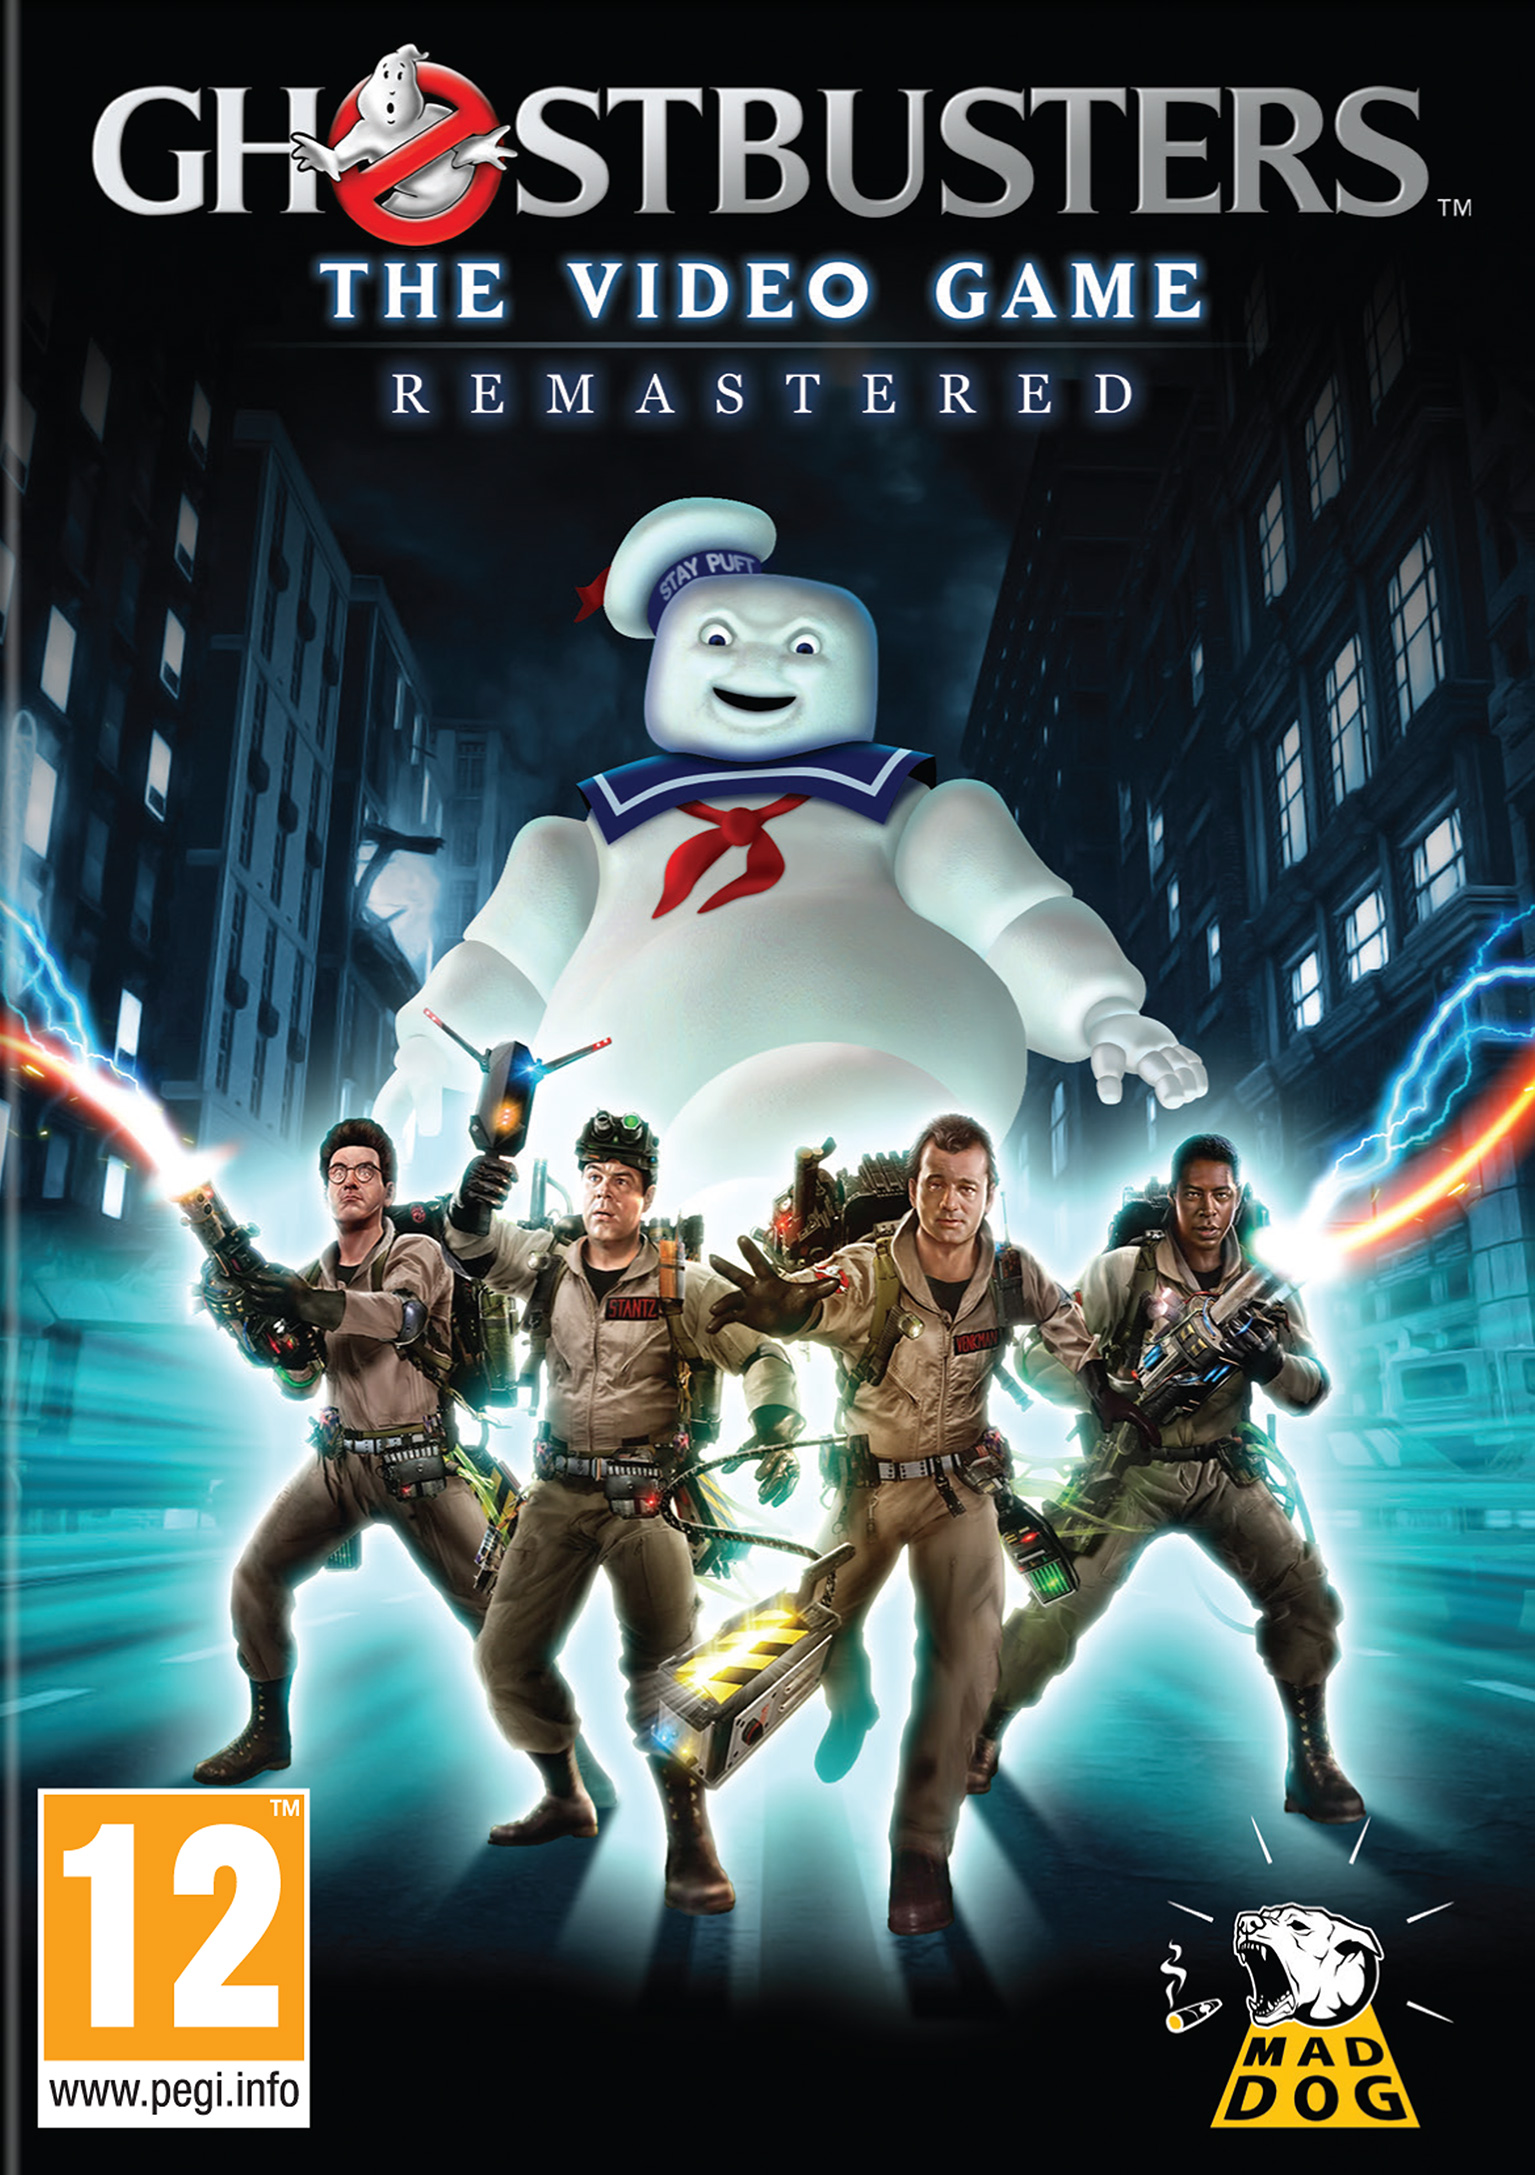 Ghostbusters: The Video Game - Remastered - predný DVD obal